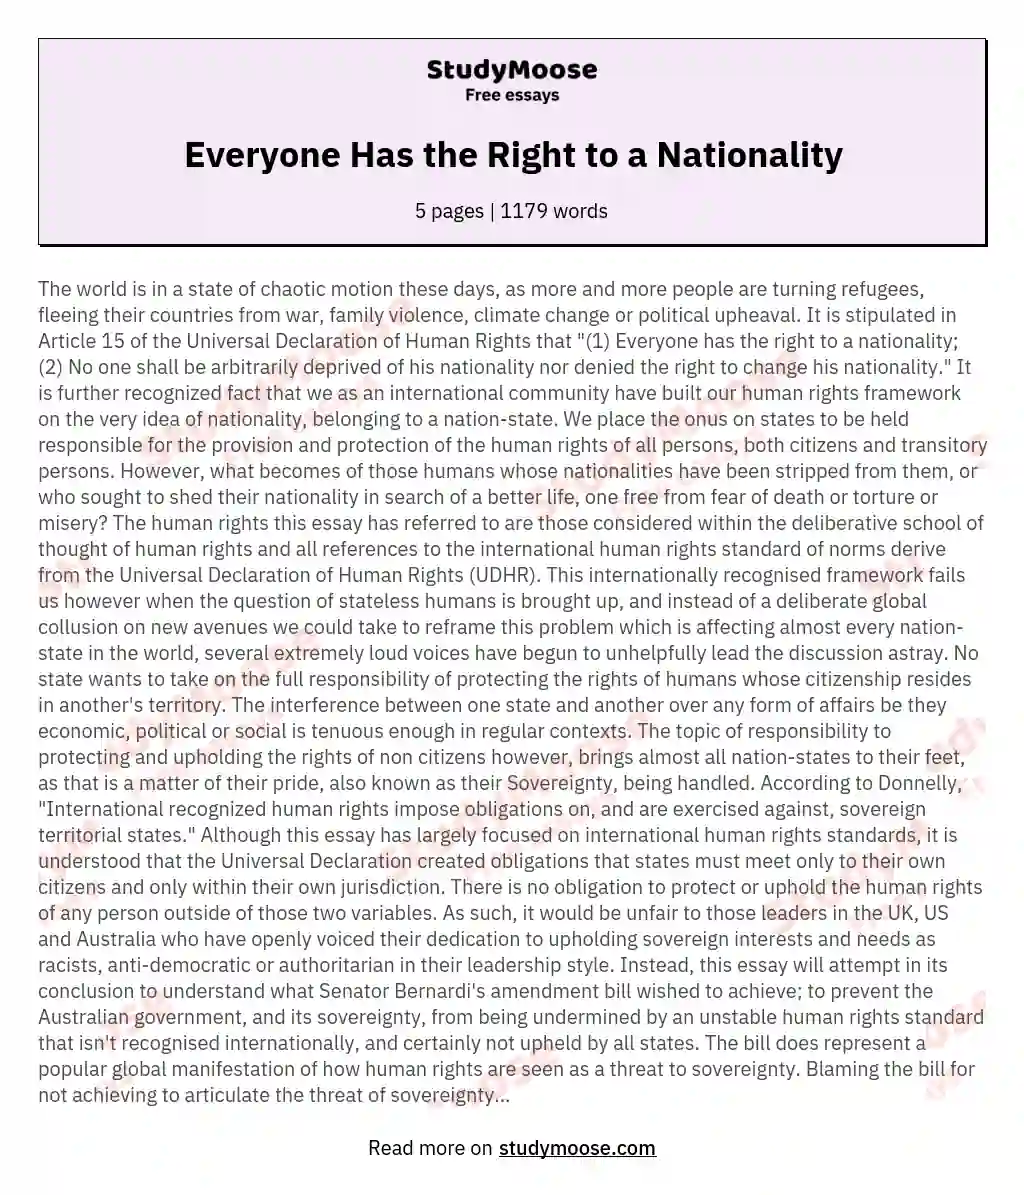 Everyone Has the Right to a Nationality essay